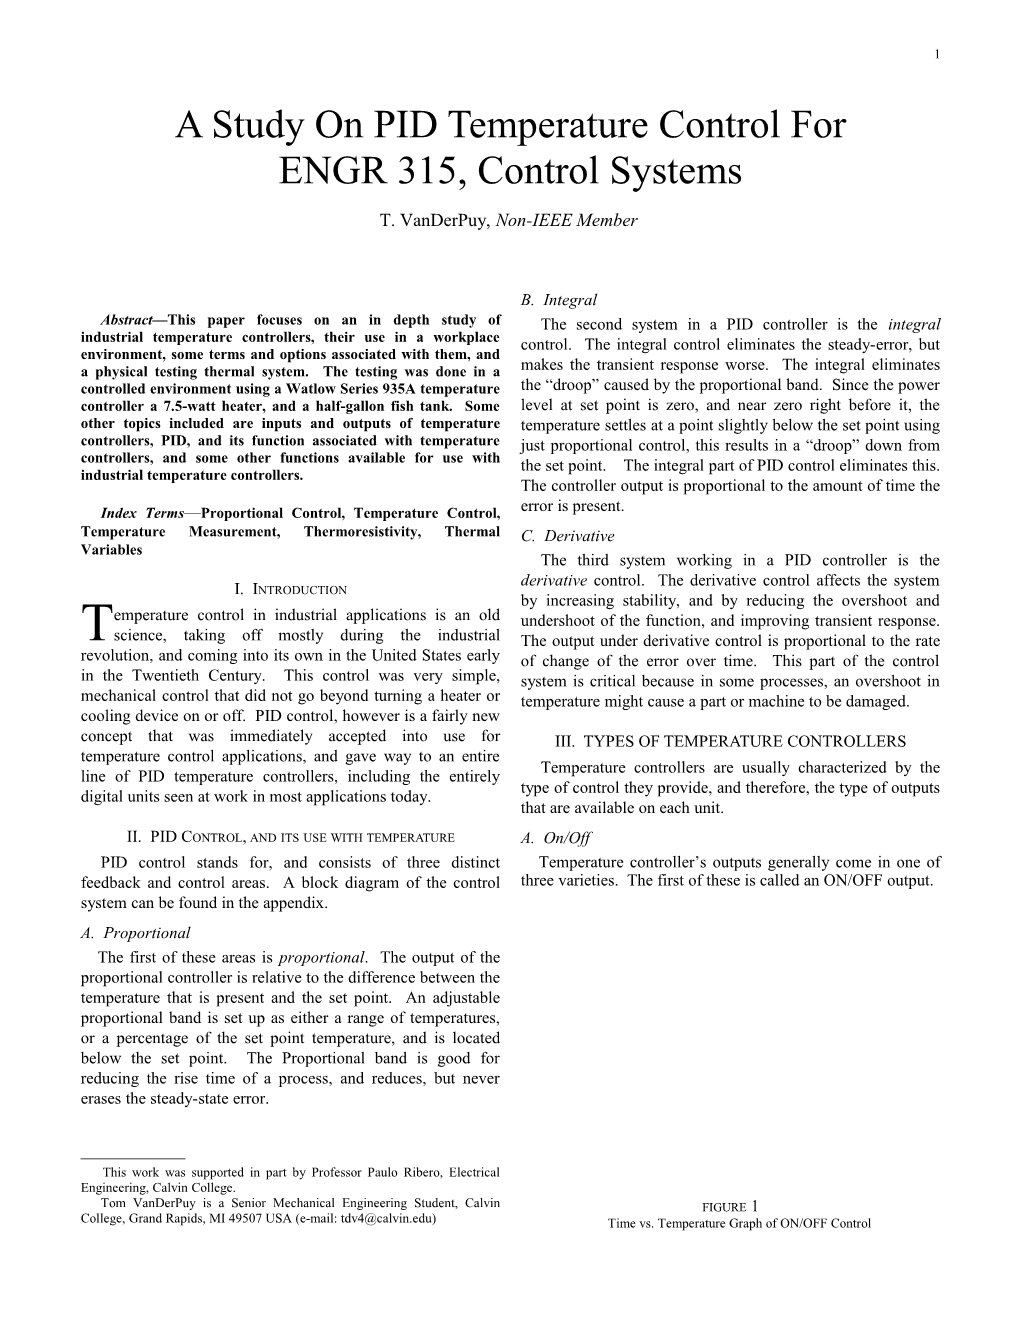 A Study on PID Temperature Control for ENGR 315, Control Systems